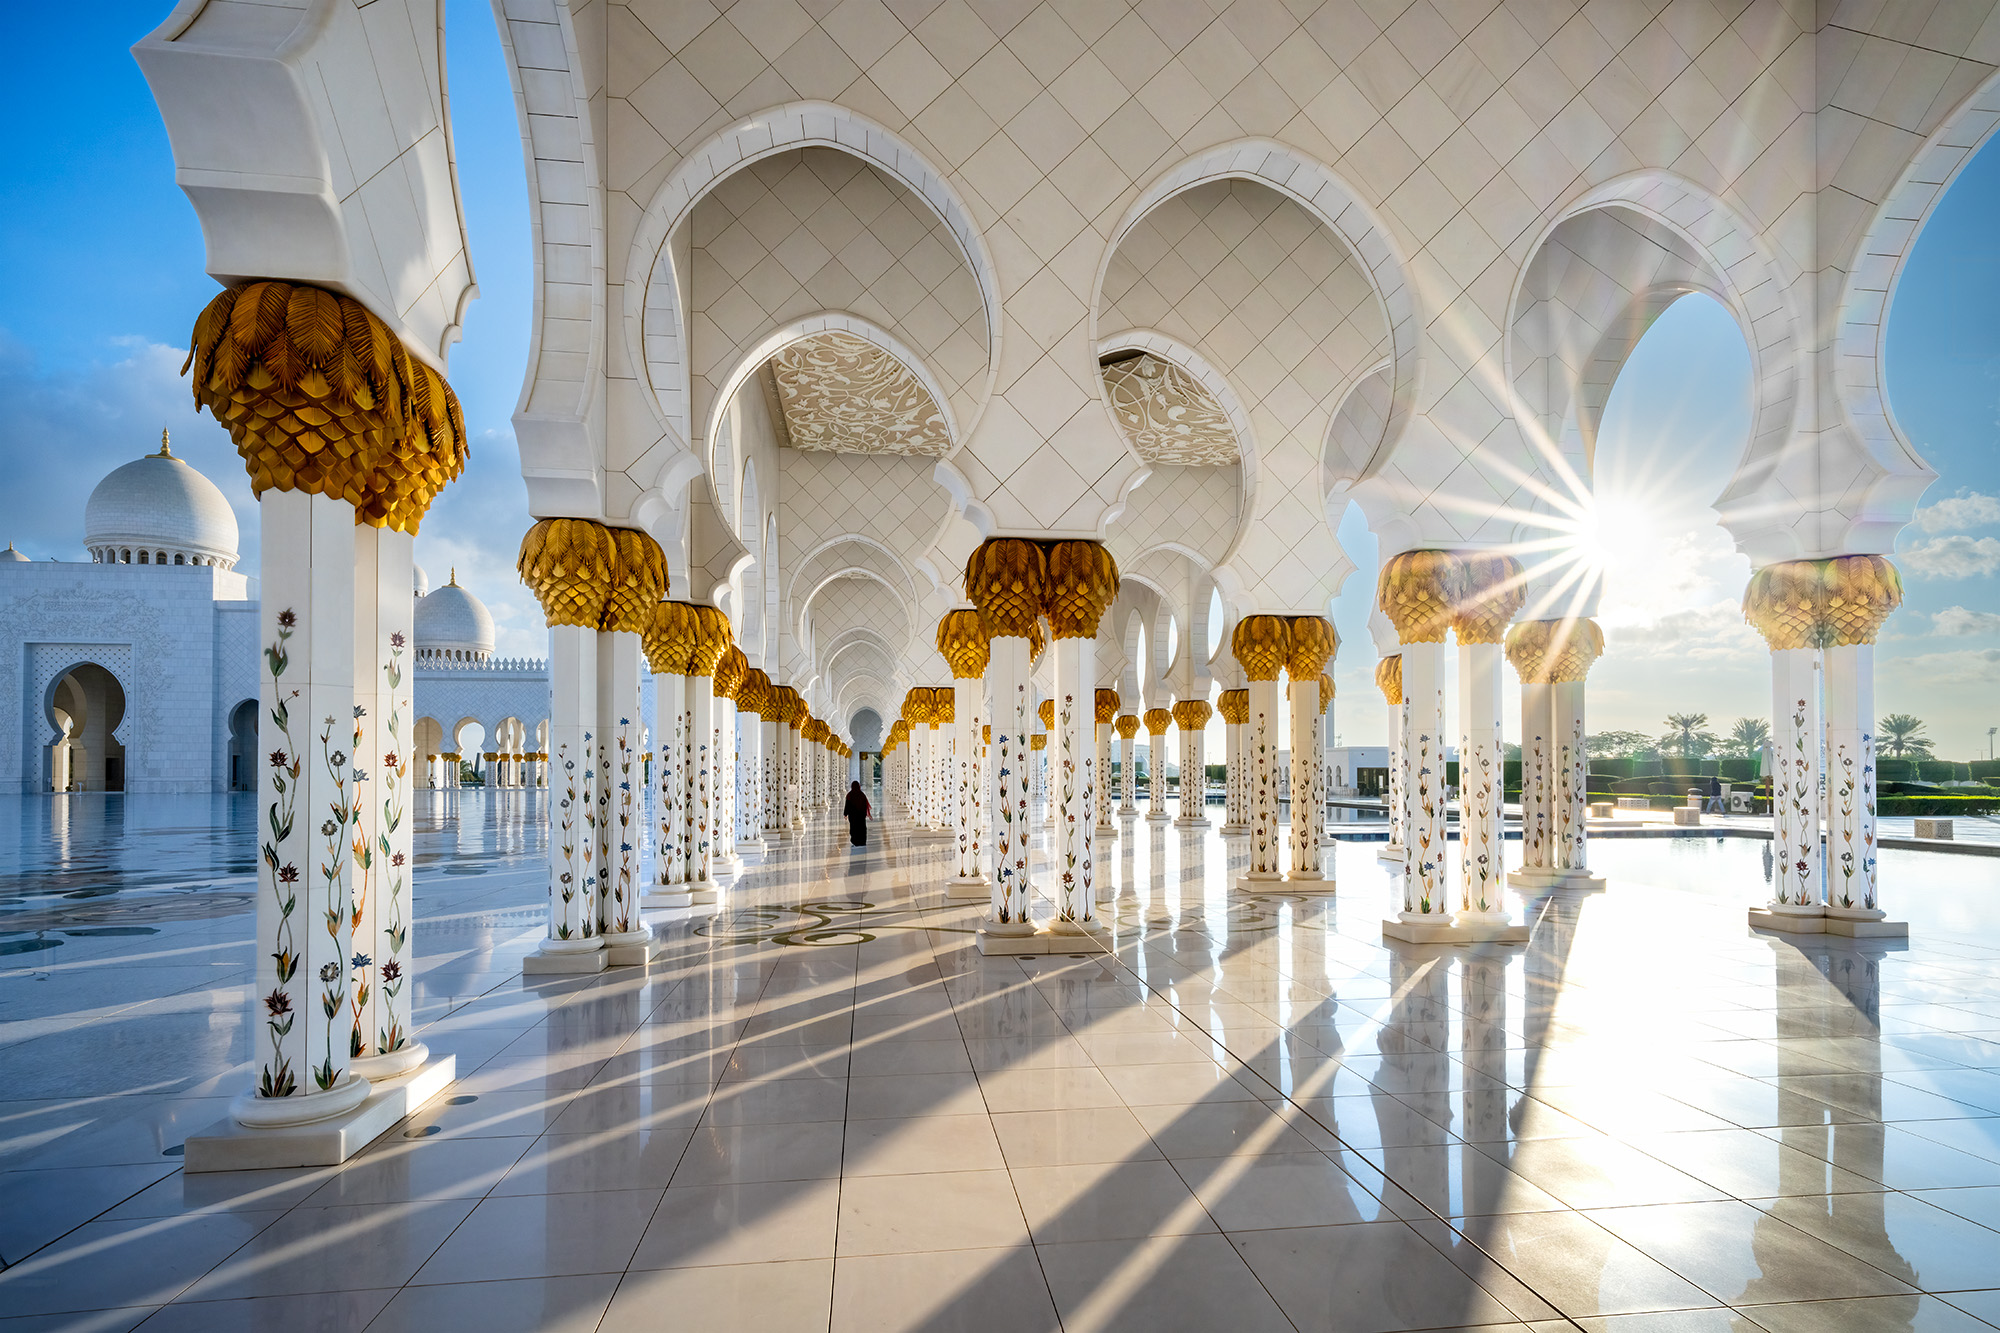 In the heart of the Sheikh Zayed White Mosque, "Illuminated Passage" is born from a moment of serendipity. A woman's elegant...